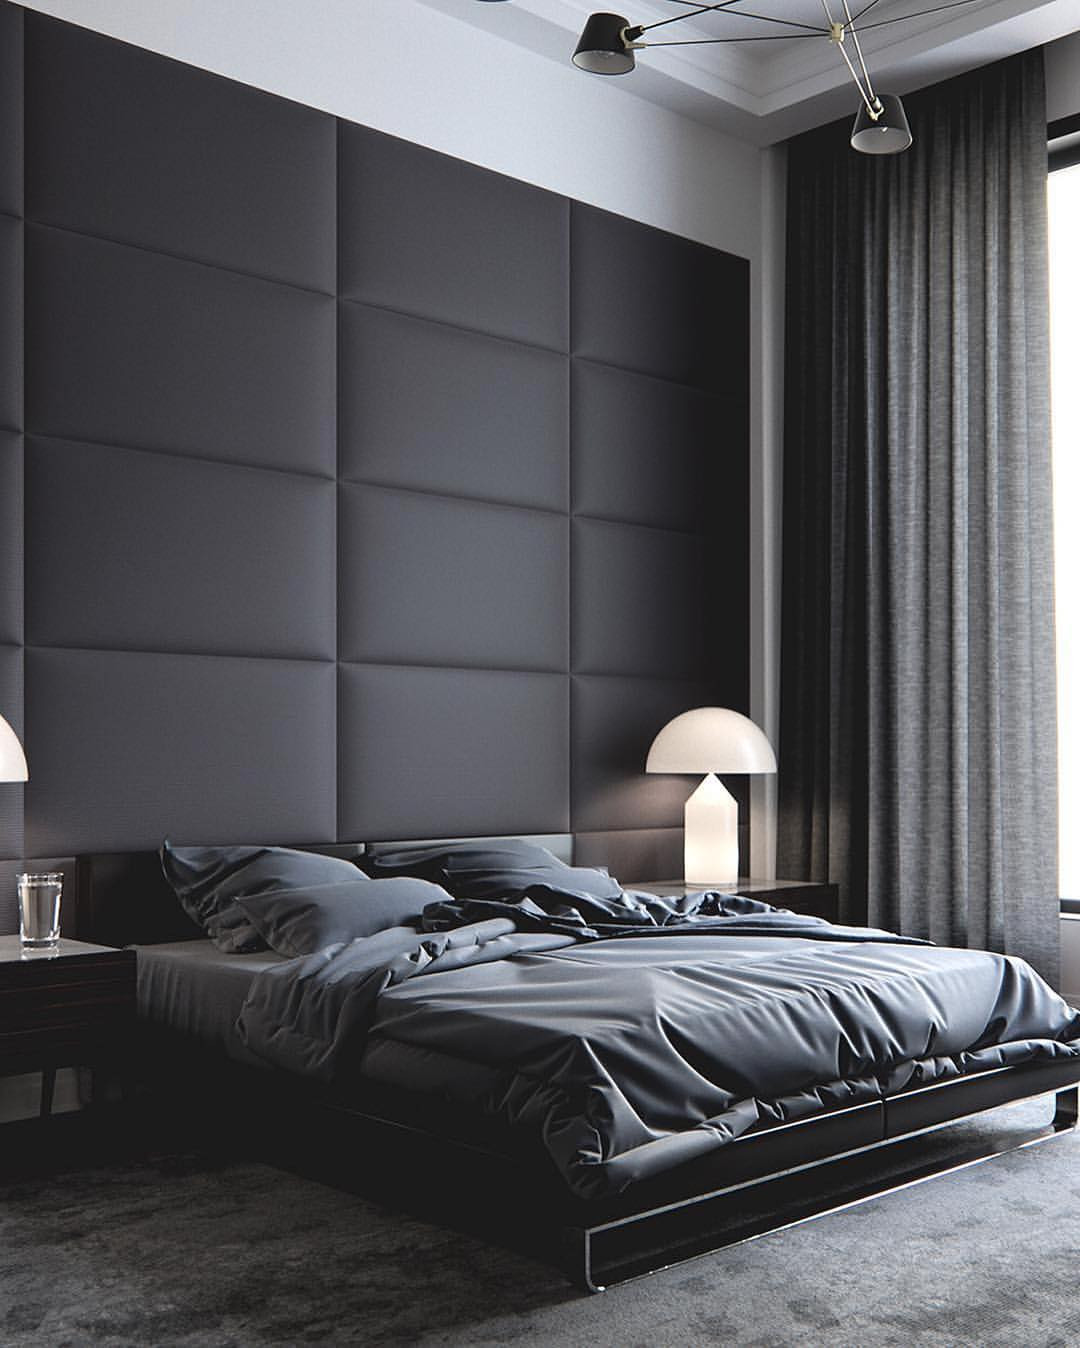 Alluring Bedroom Designs Dark Wall 10 Chambres Inspirantes Aux tonalités Masculines Frenchy